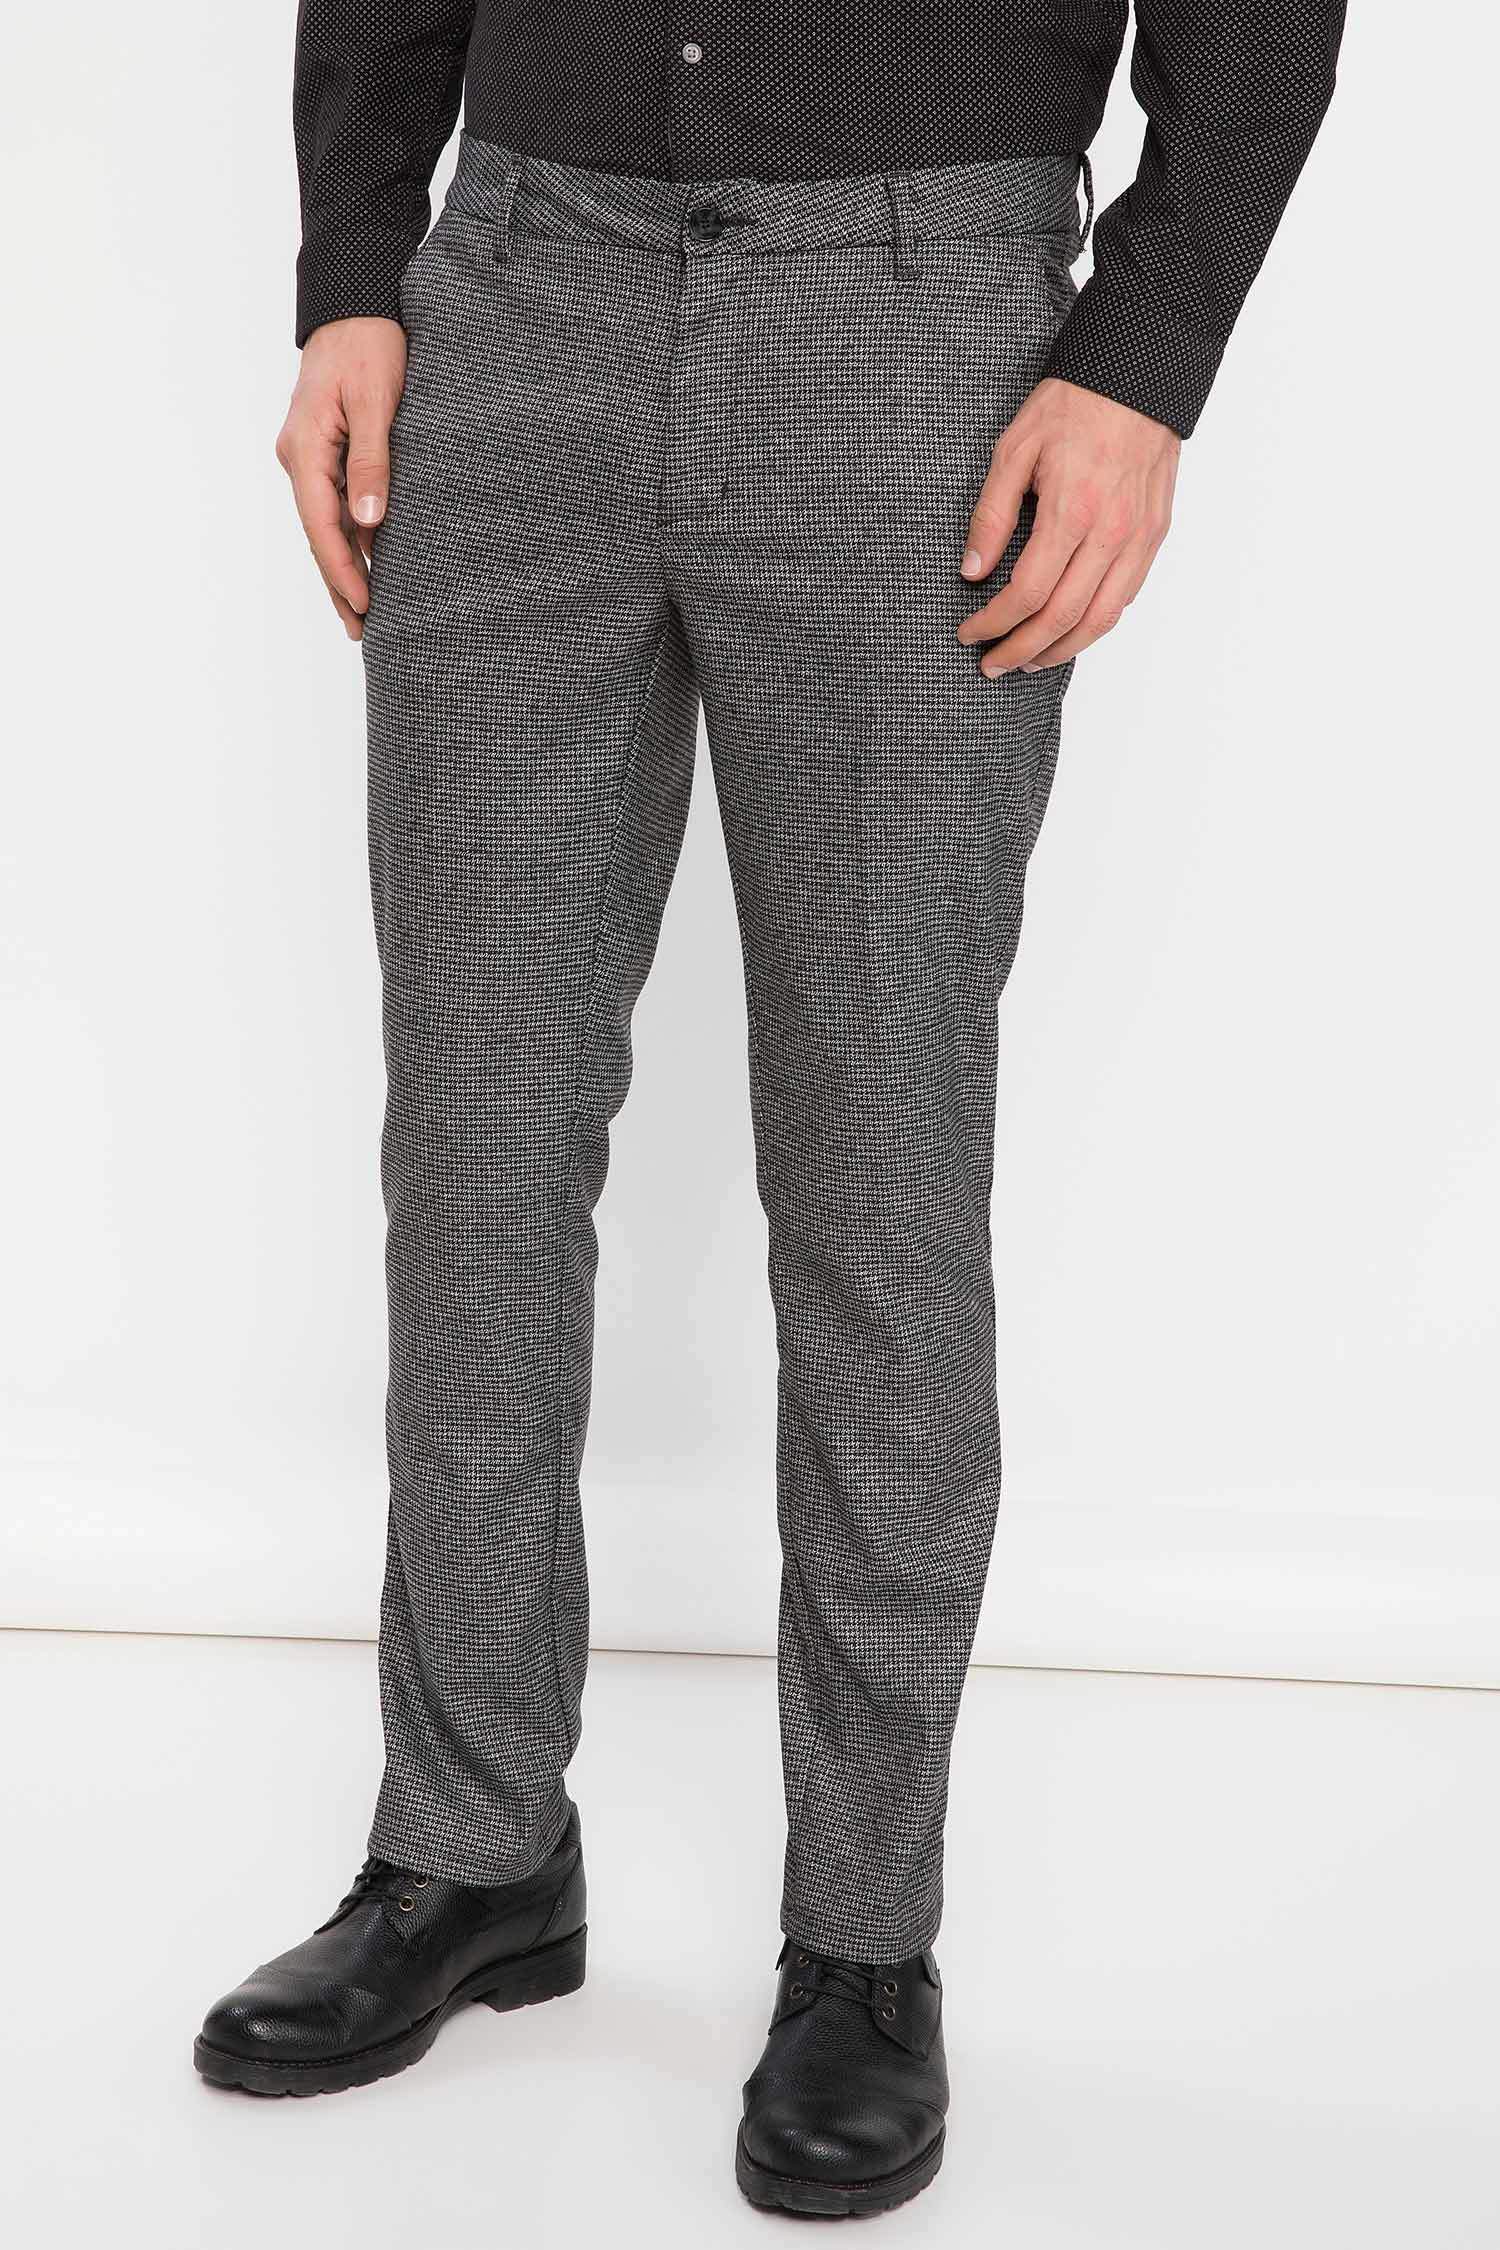 Defacto Man Woven Trousers. 2